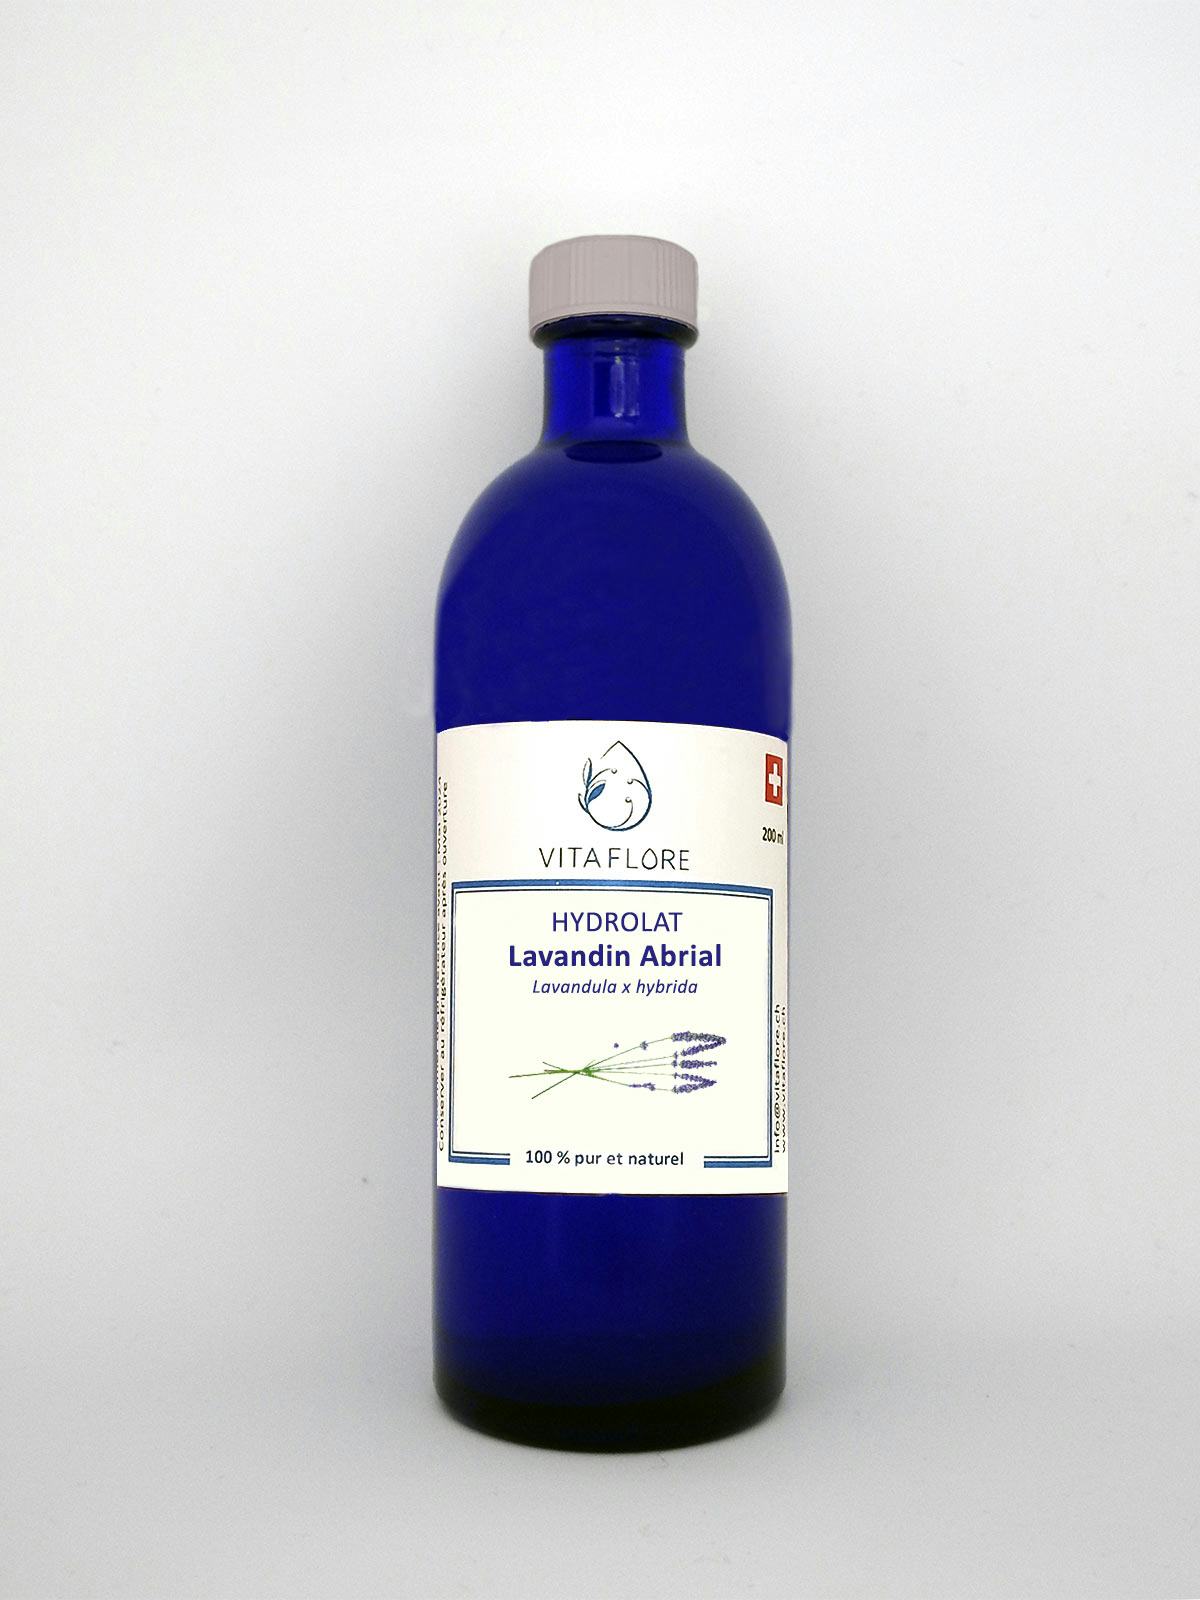 Hydrolat Lavandin Abrial, artisanal product for direct sale in Switzerland